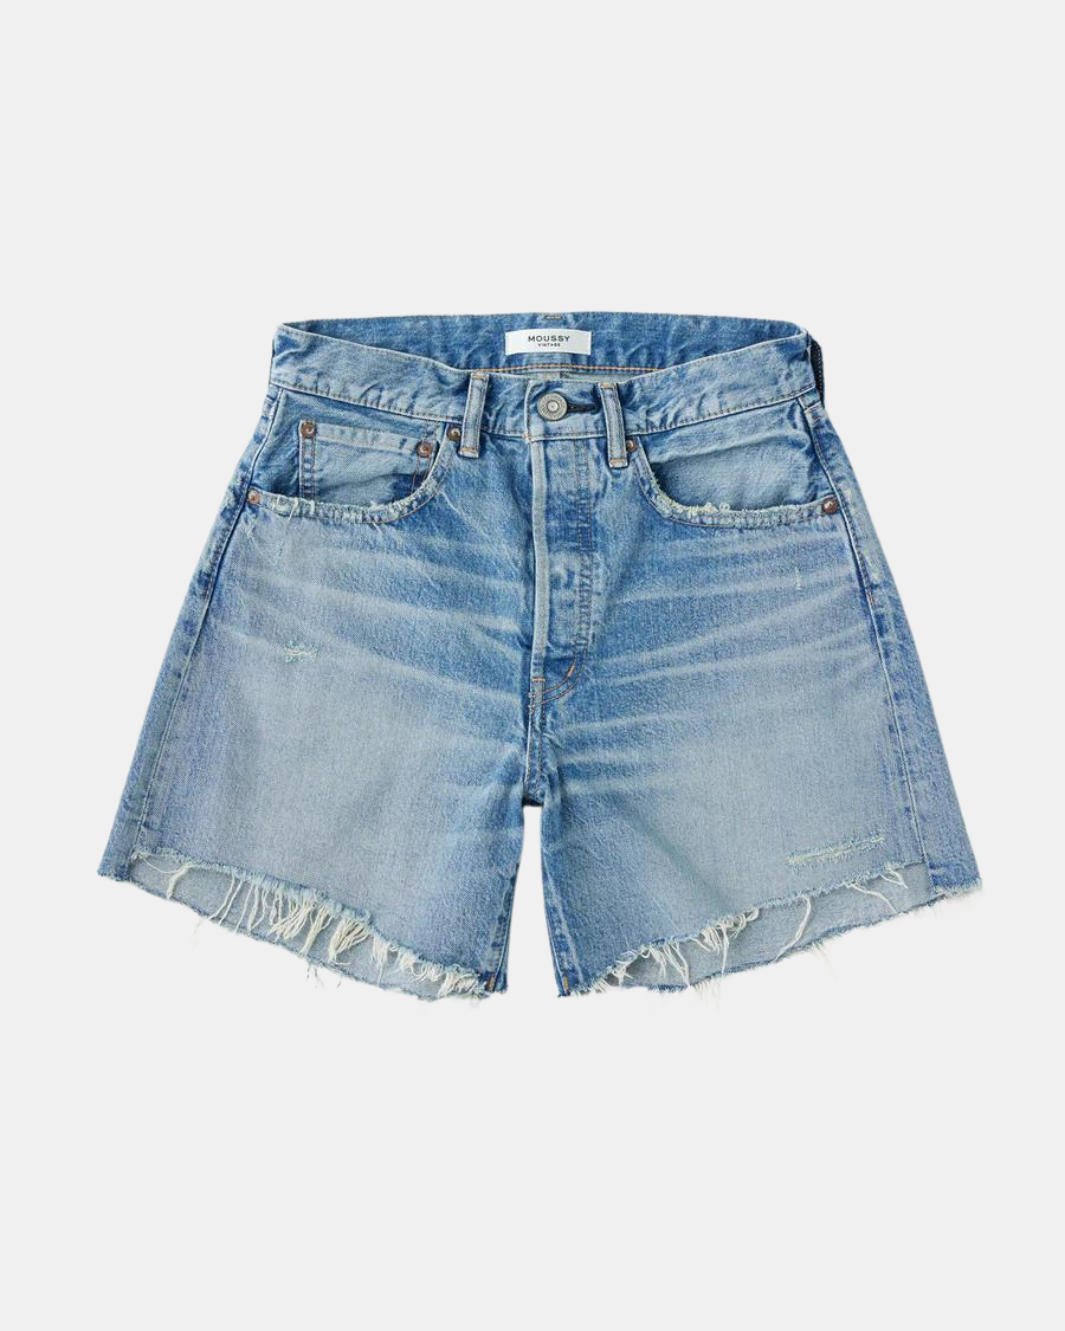 MV GRATERFORD SHORTS IN BLUE - Romi Boutique